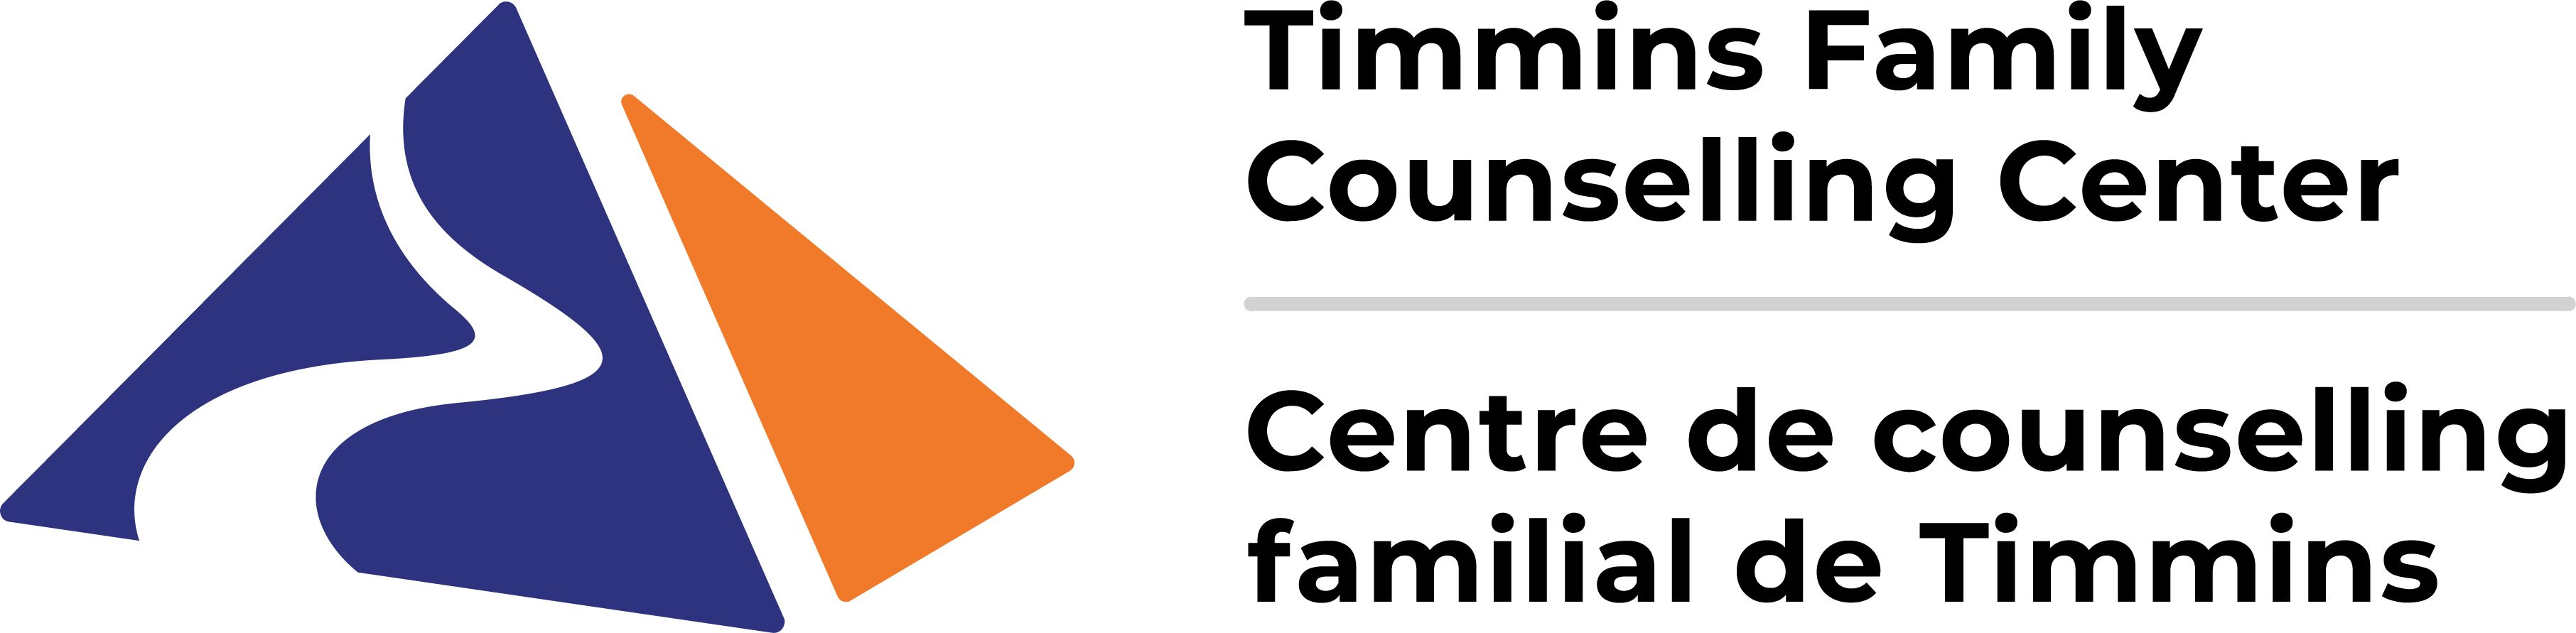 Timmins Family Counselling Center Inc.